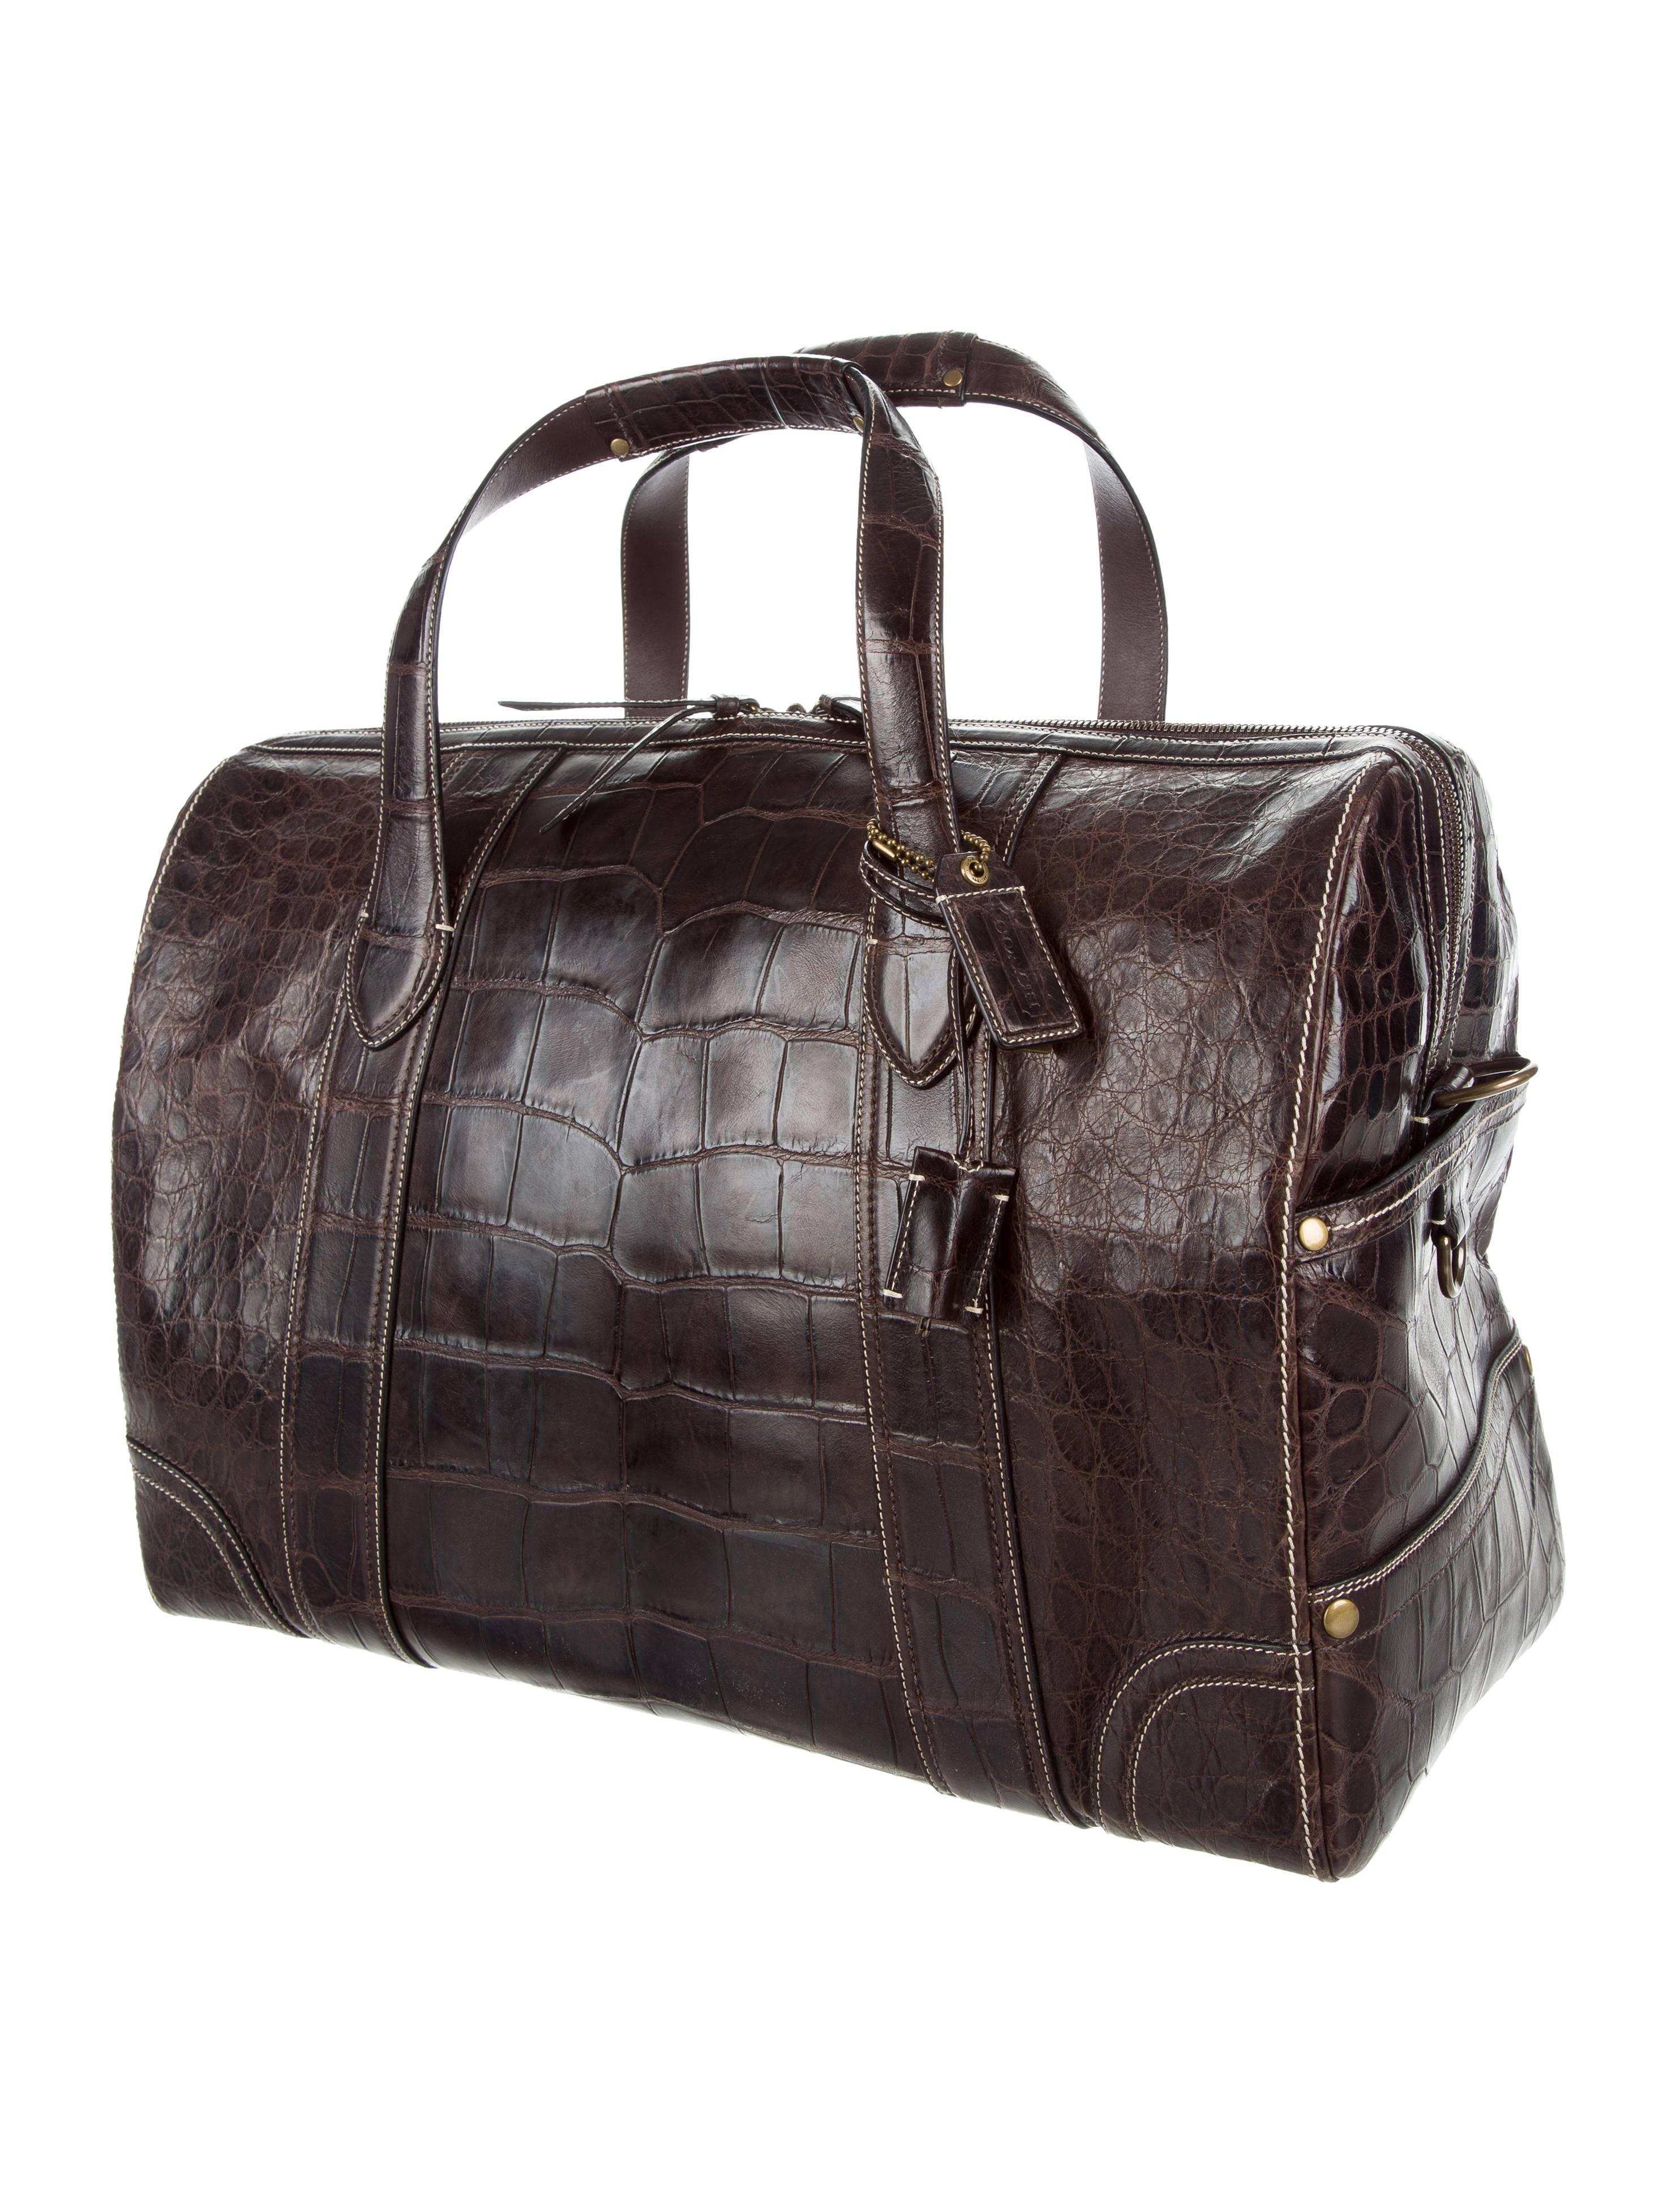 Coach Crocodile Chocolate Brown Men's Carryall Weekender Travel Tote Duffle Bag

Original purchase price $24,995
Crocodile 
Brass hardware
Woven lining
Zipper closure
Removable shoulder strap 21